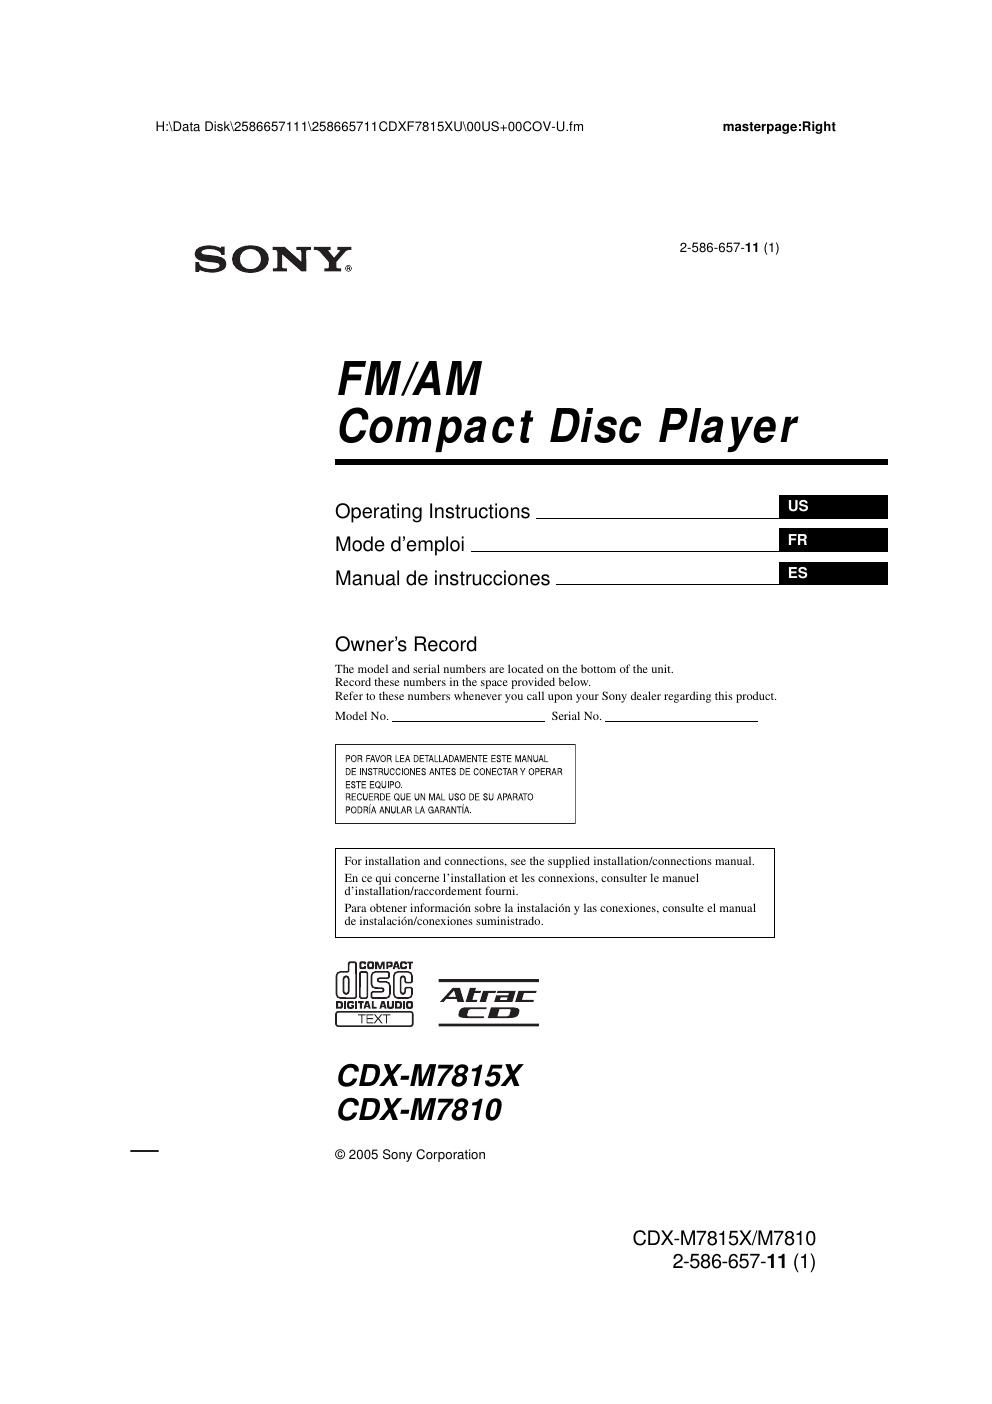 sony cdx m 7810 owners manual